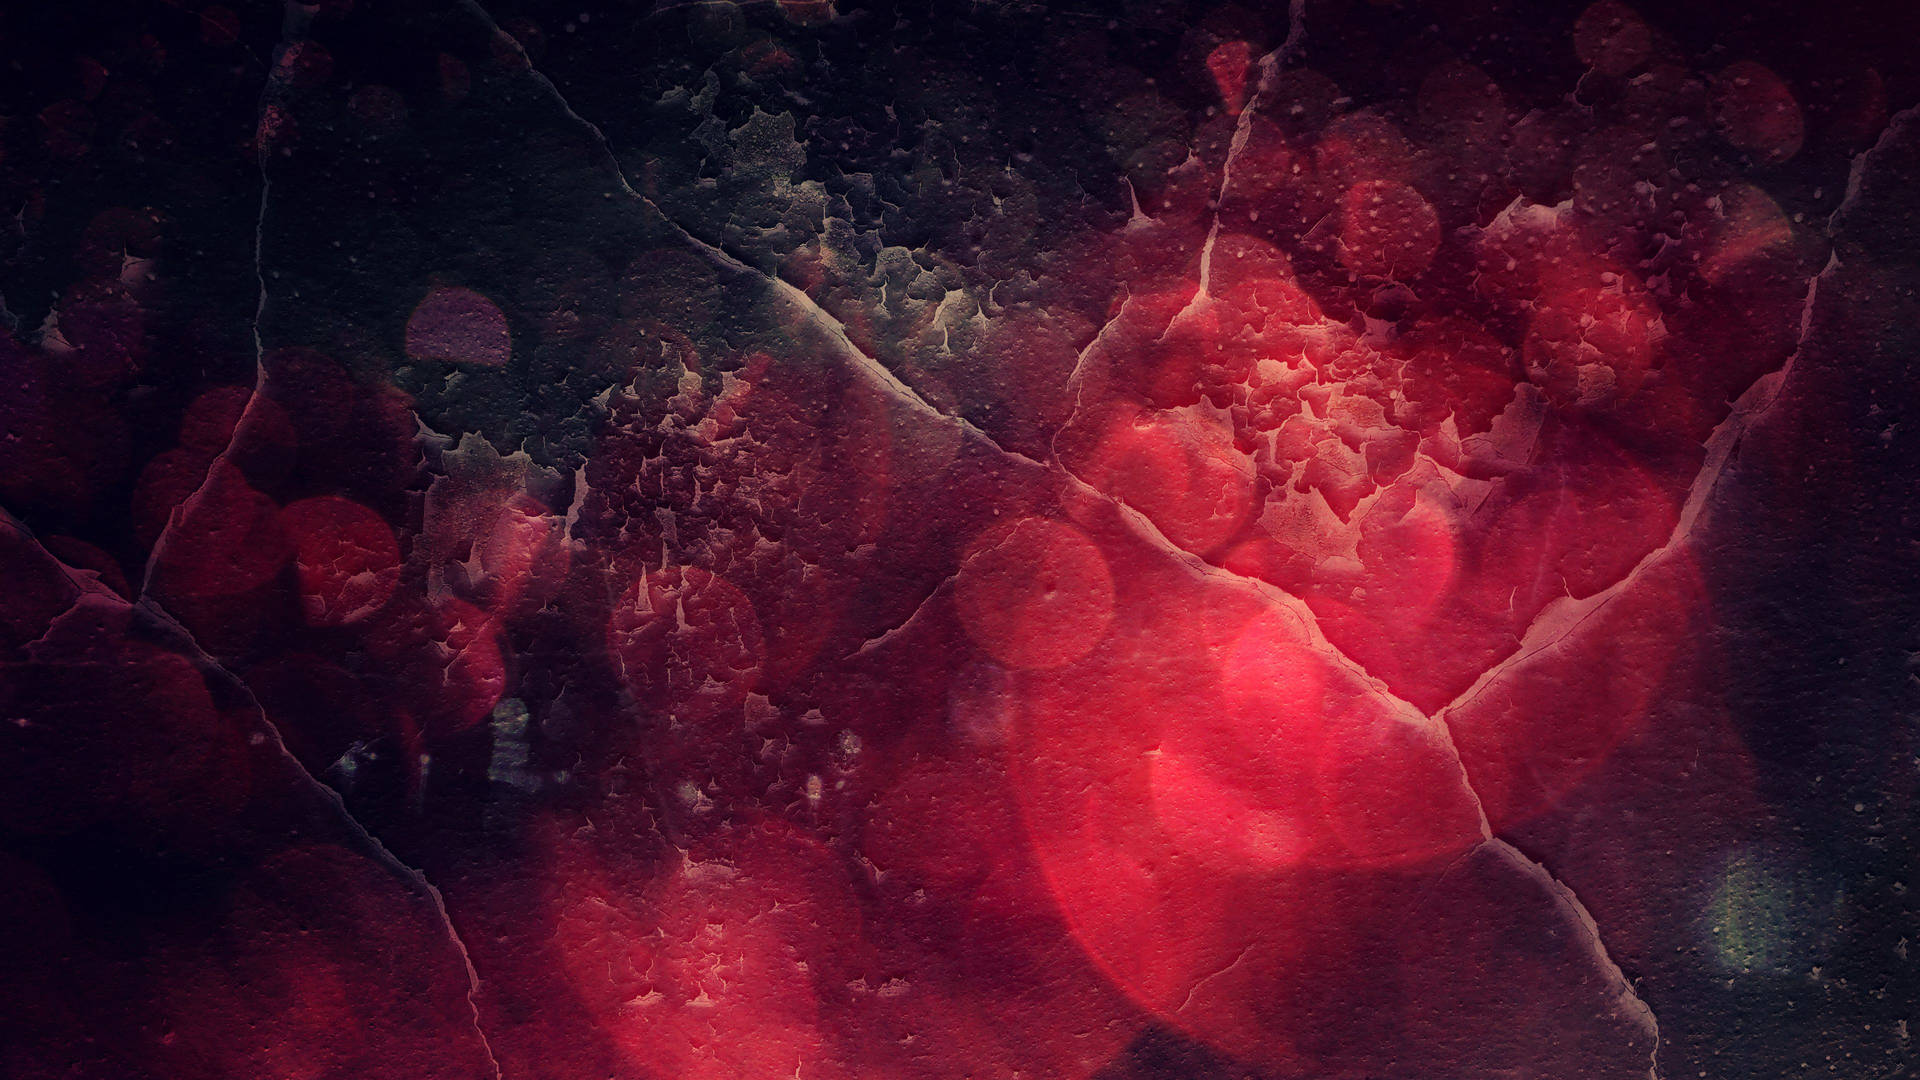 Textured Dark And Red Abstract Art Wallpaper